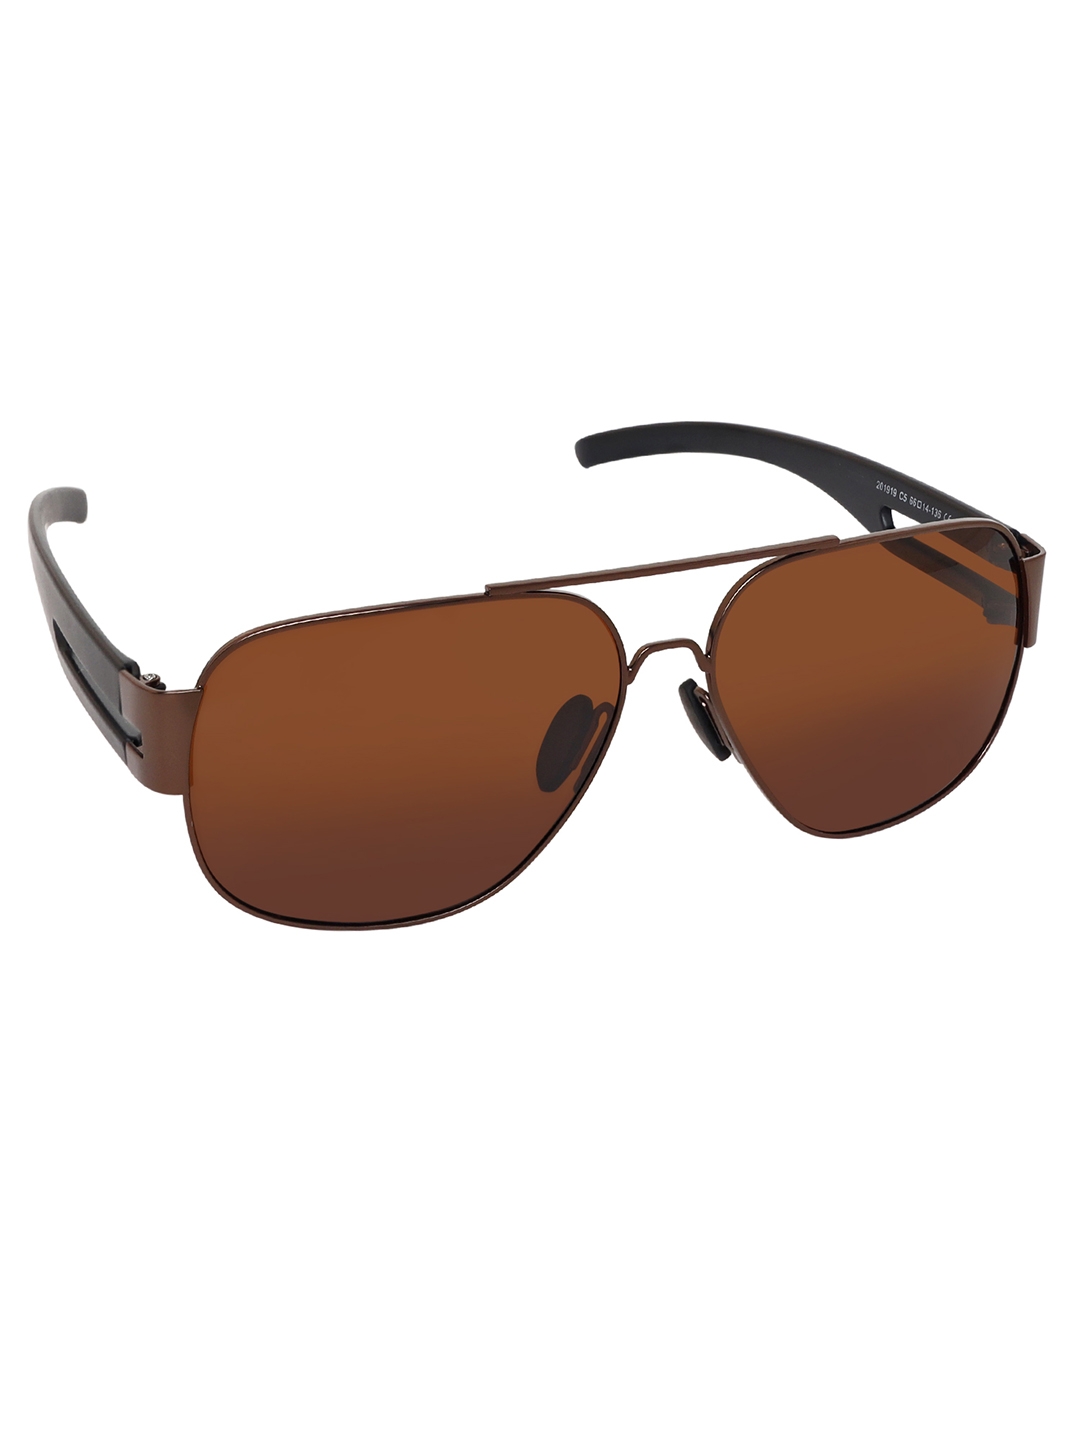 Aeropostale | Aeropostale AERO_SUN_201919_C2 Summer Sunglasses for Men comes with UV protection Polarized Anti Glare lens Mens trending Summer Style Full Brown Shaded Lens with Black Acrylic Frame. 1